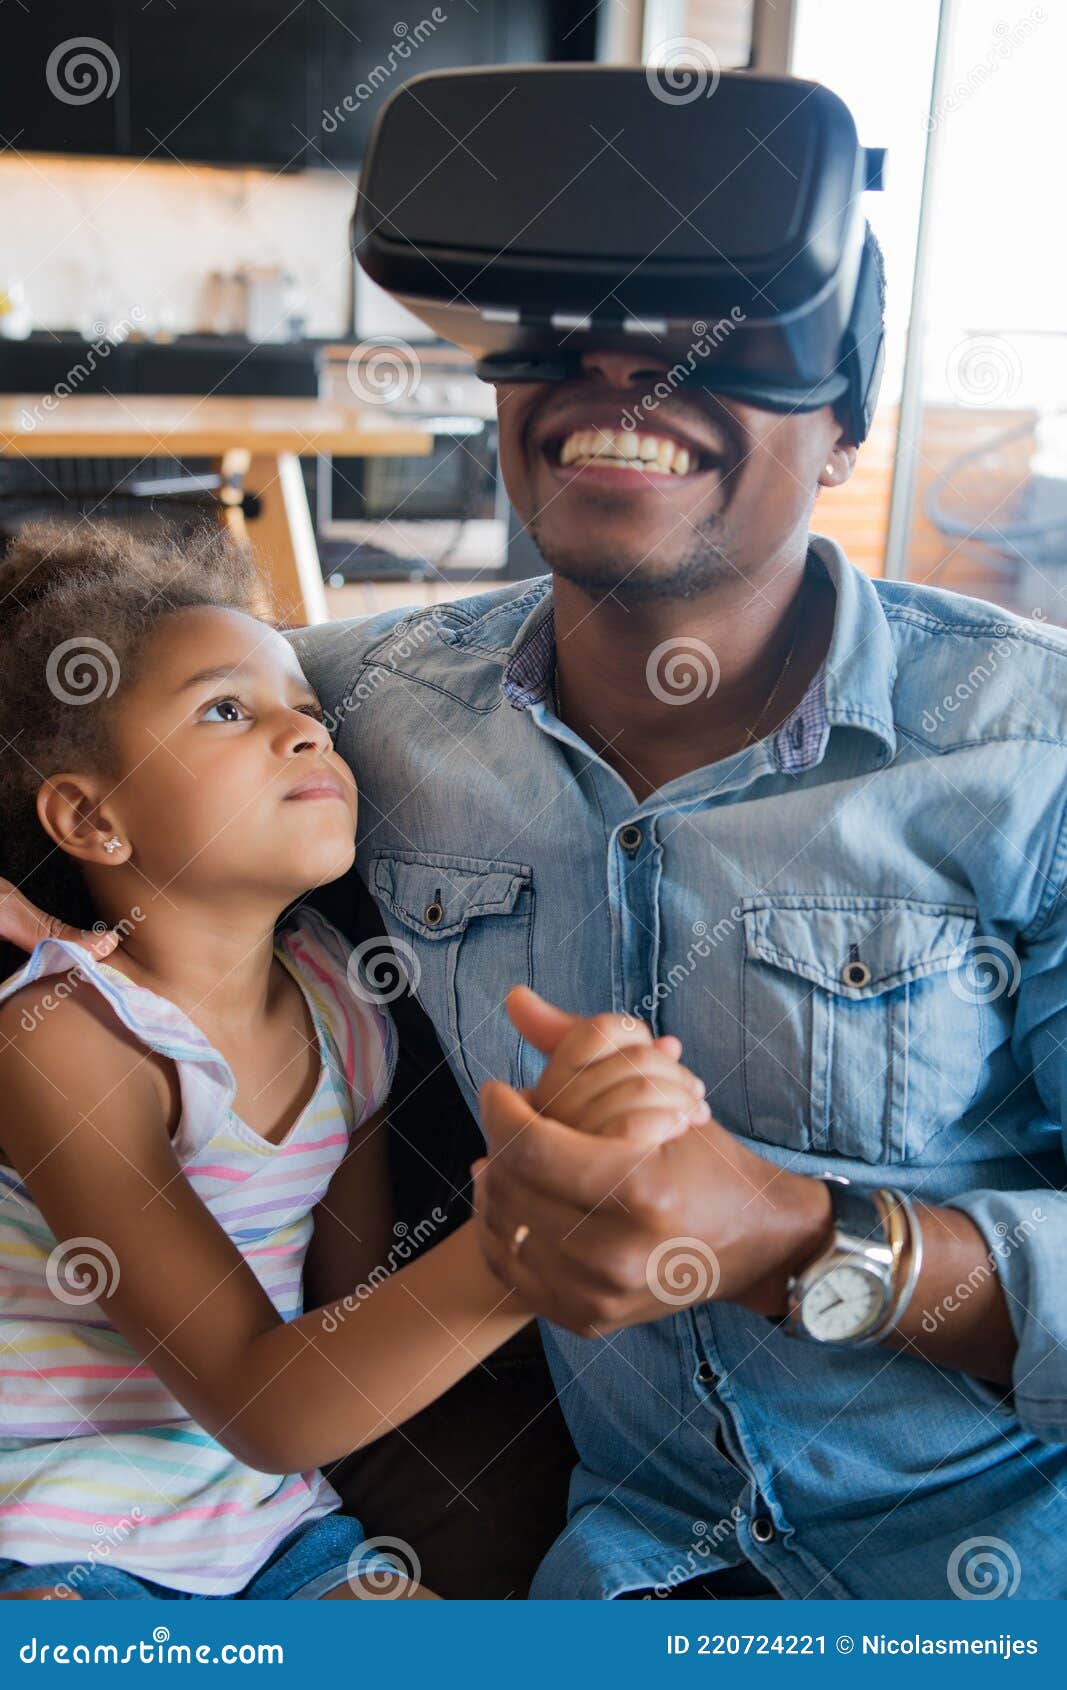 father and daughter playing video games.